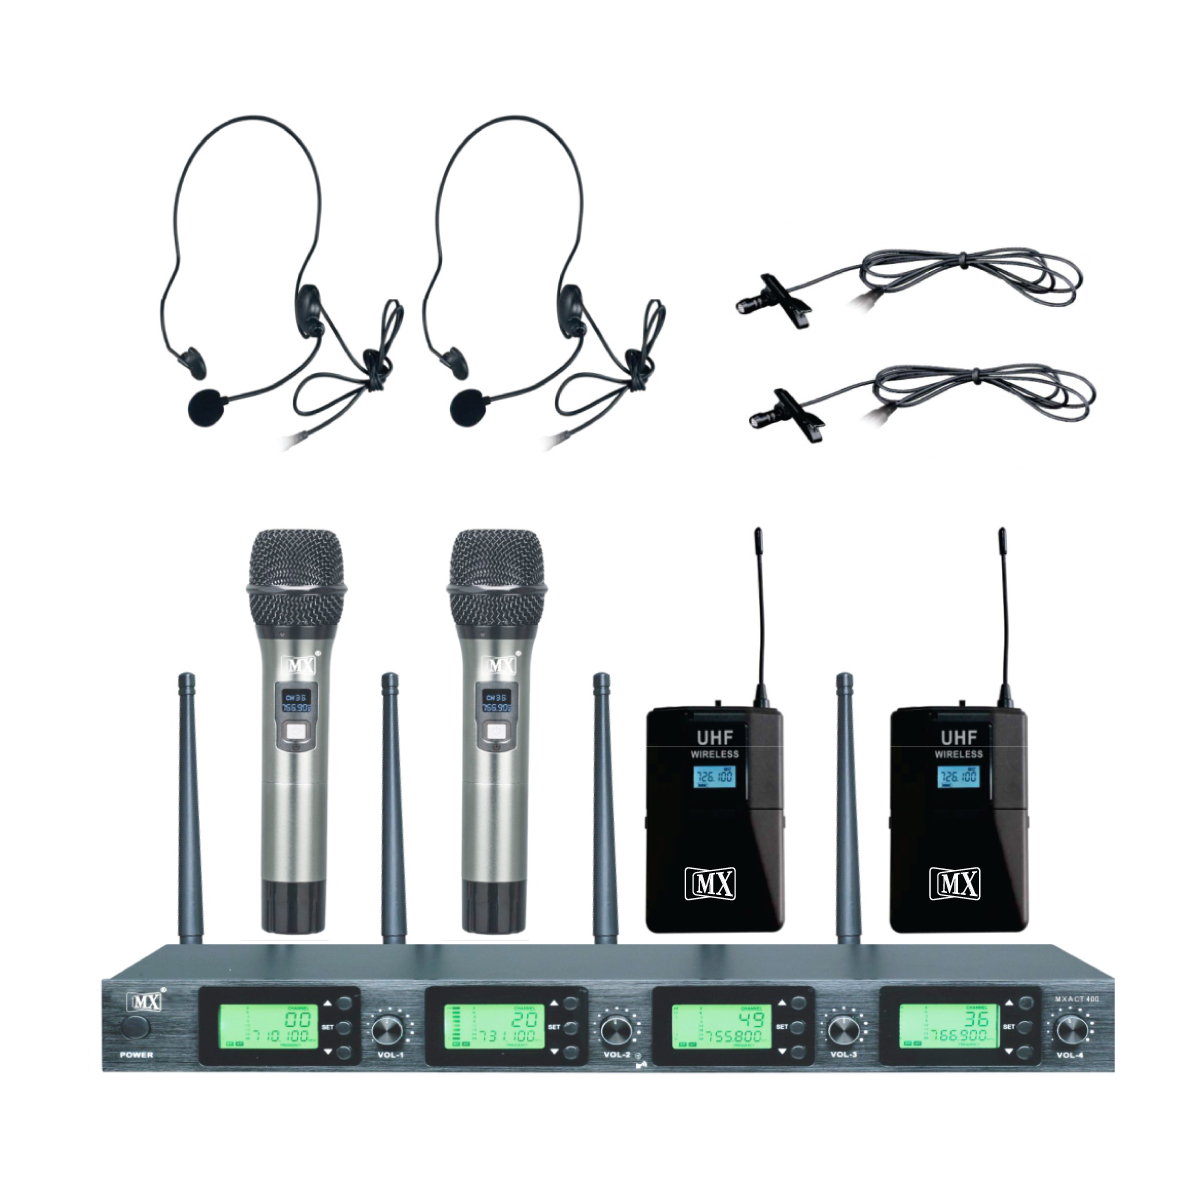 MX UHF WIRELESS MICROPHONE SYSTEM WITH 2 HANDHELD & 2 LAPEL MIC PACKs  TRANSMITTER MICS WITH VARIABLE FREQUENCY for Party, Wedding Host,Business  Meeting & Multi-Purpose - MX MDR TECHNOLOGIES LIMITED